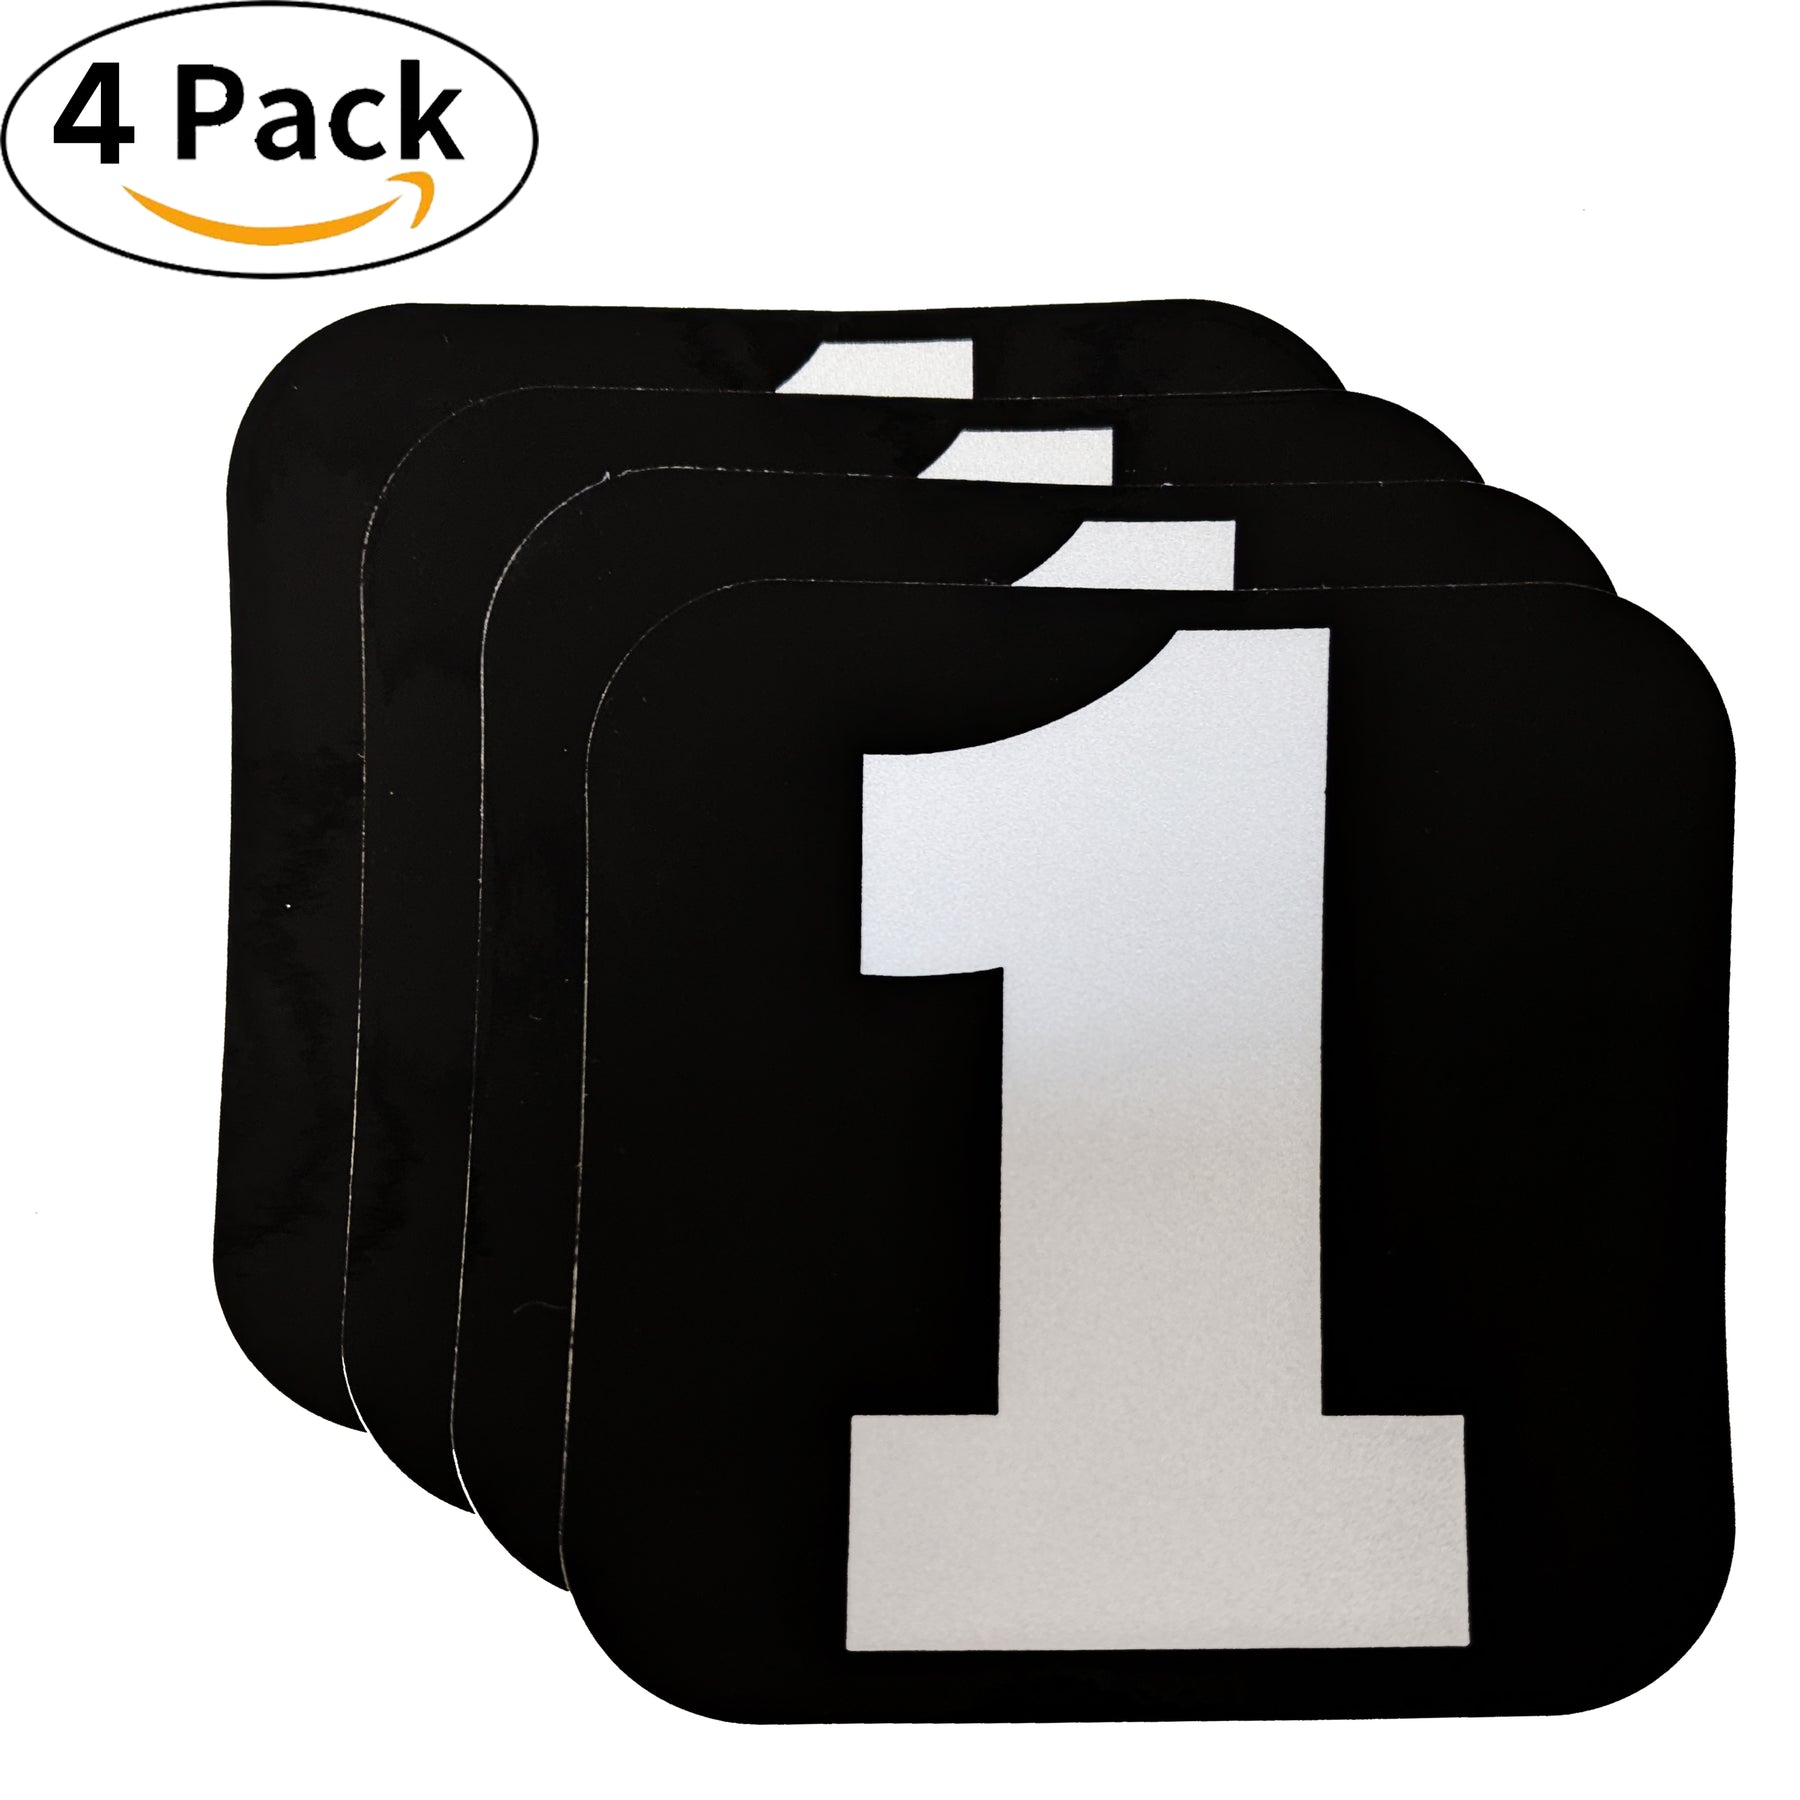 Spy Spot Set of 4 Numbered Stickers 0-9 Black Background White Font 3.5"x3.5"